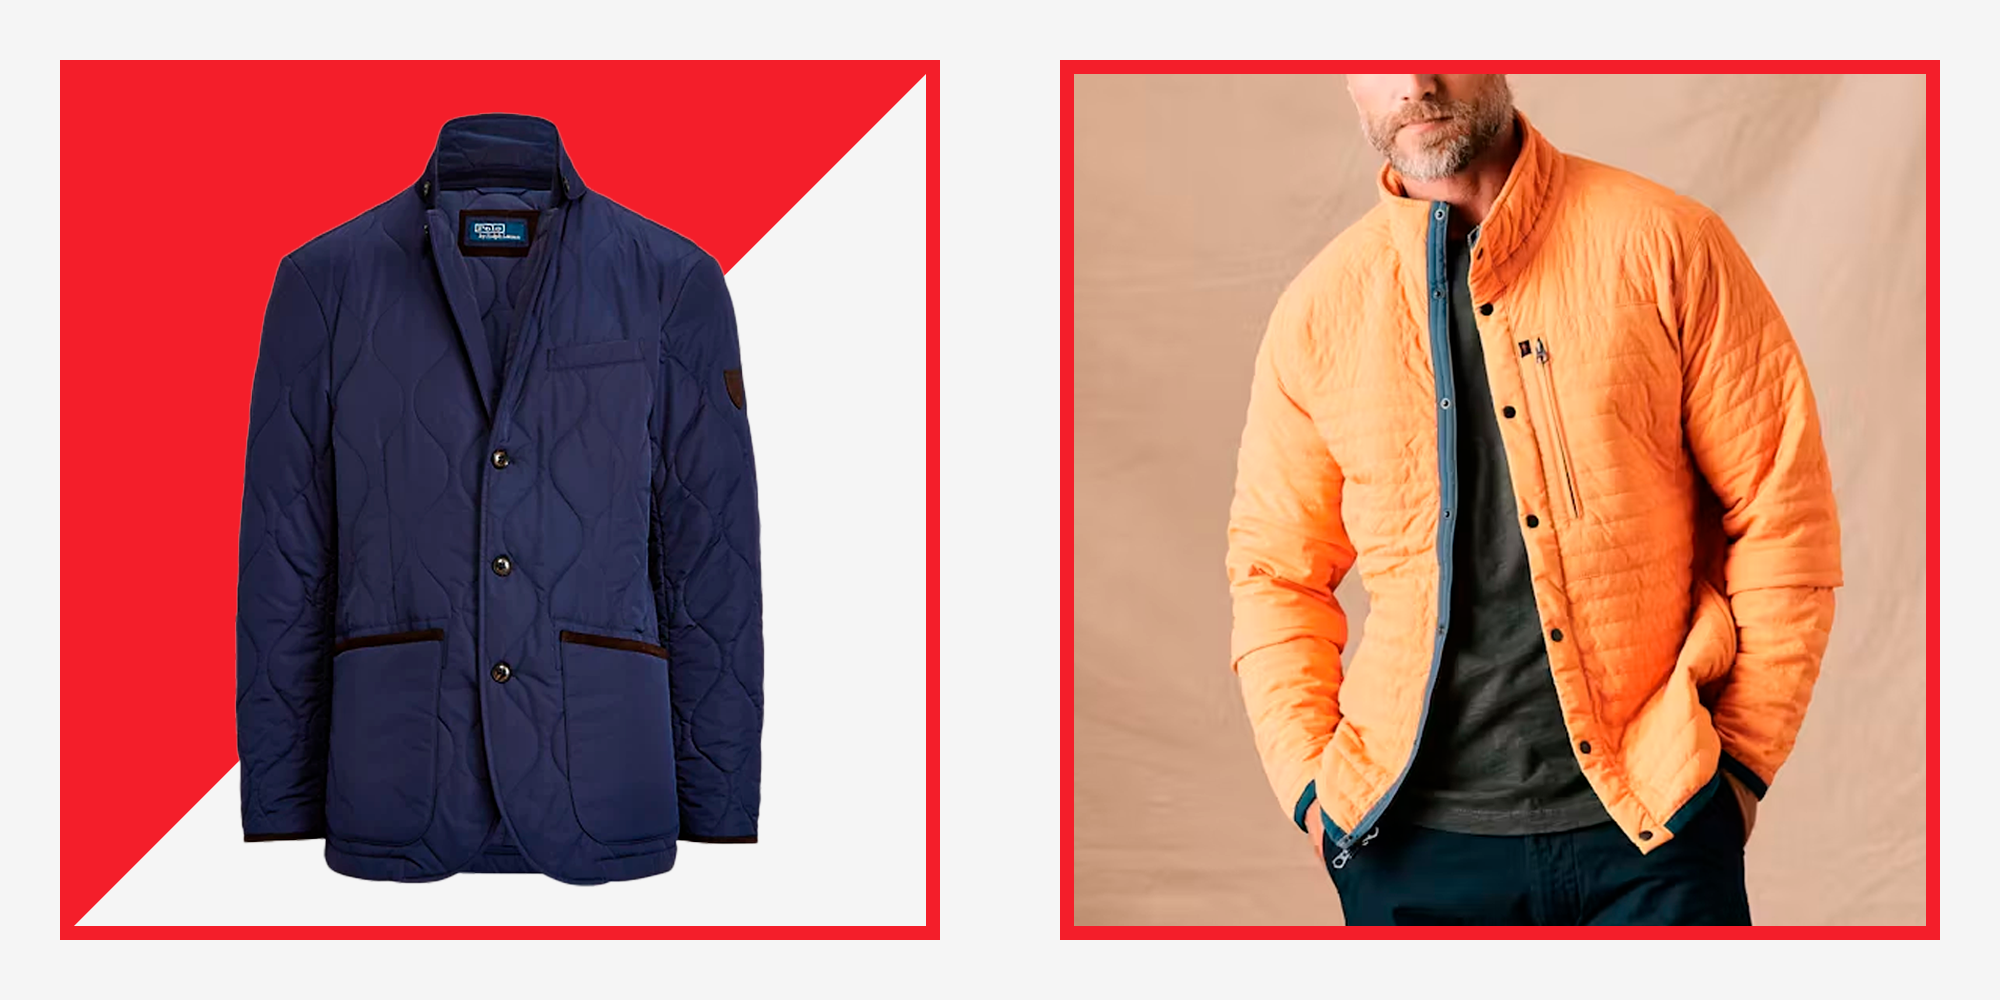 7 Styles Of Jackets For Men To Have This Winter